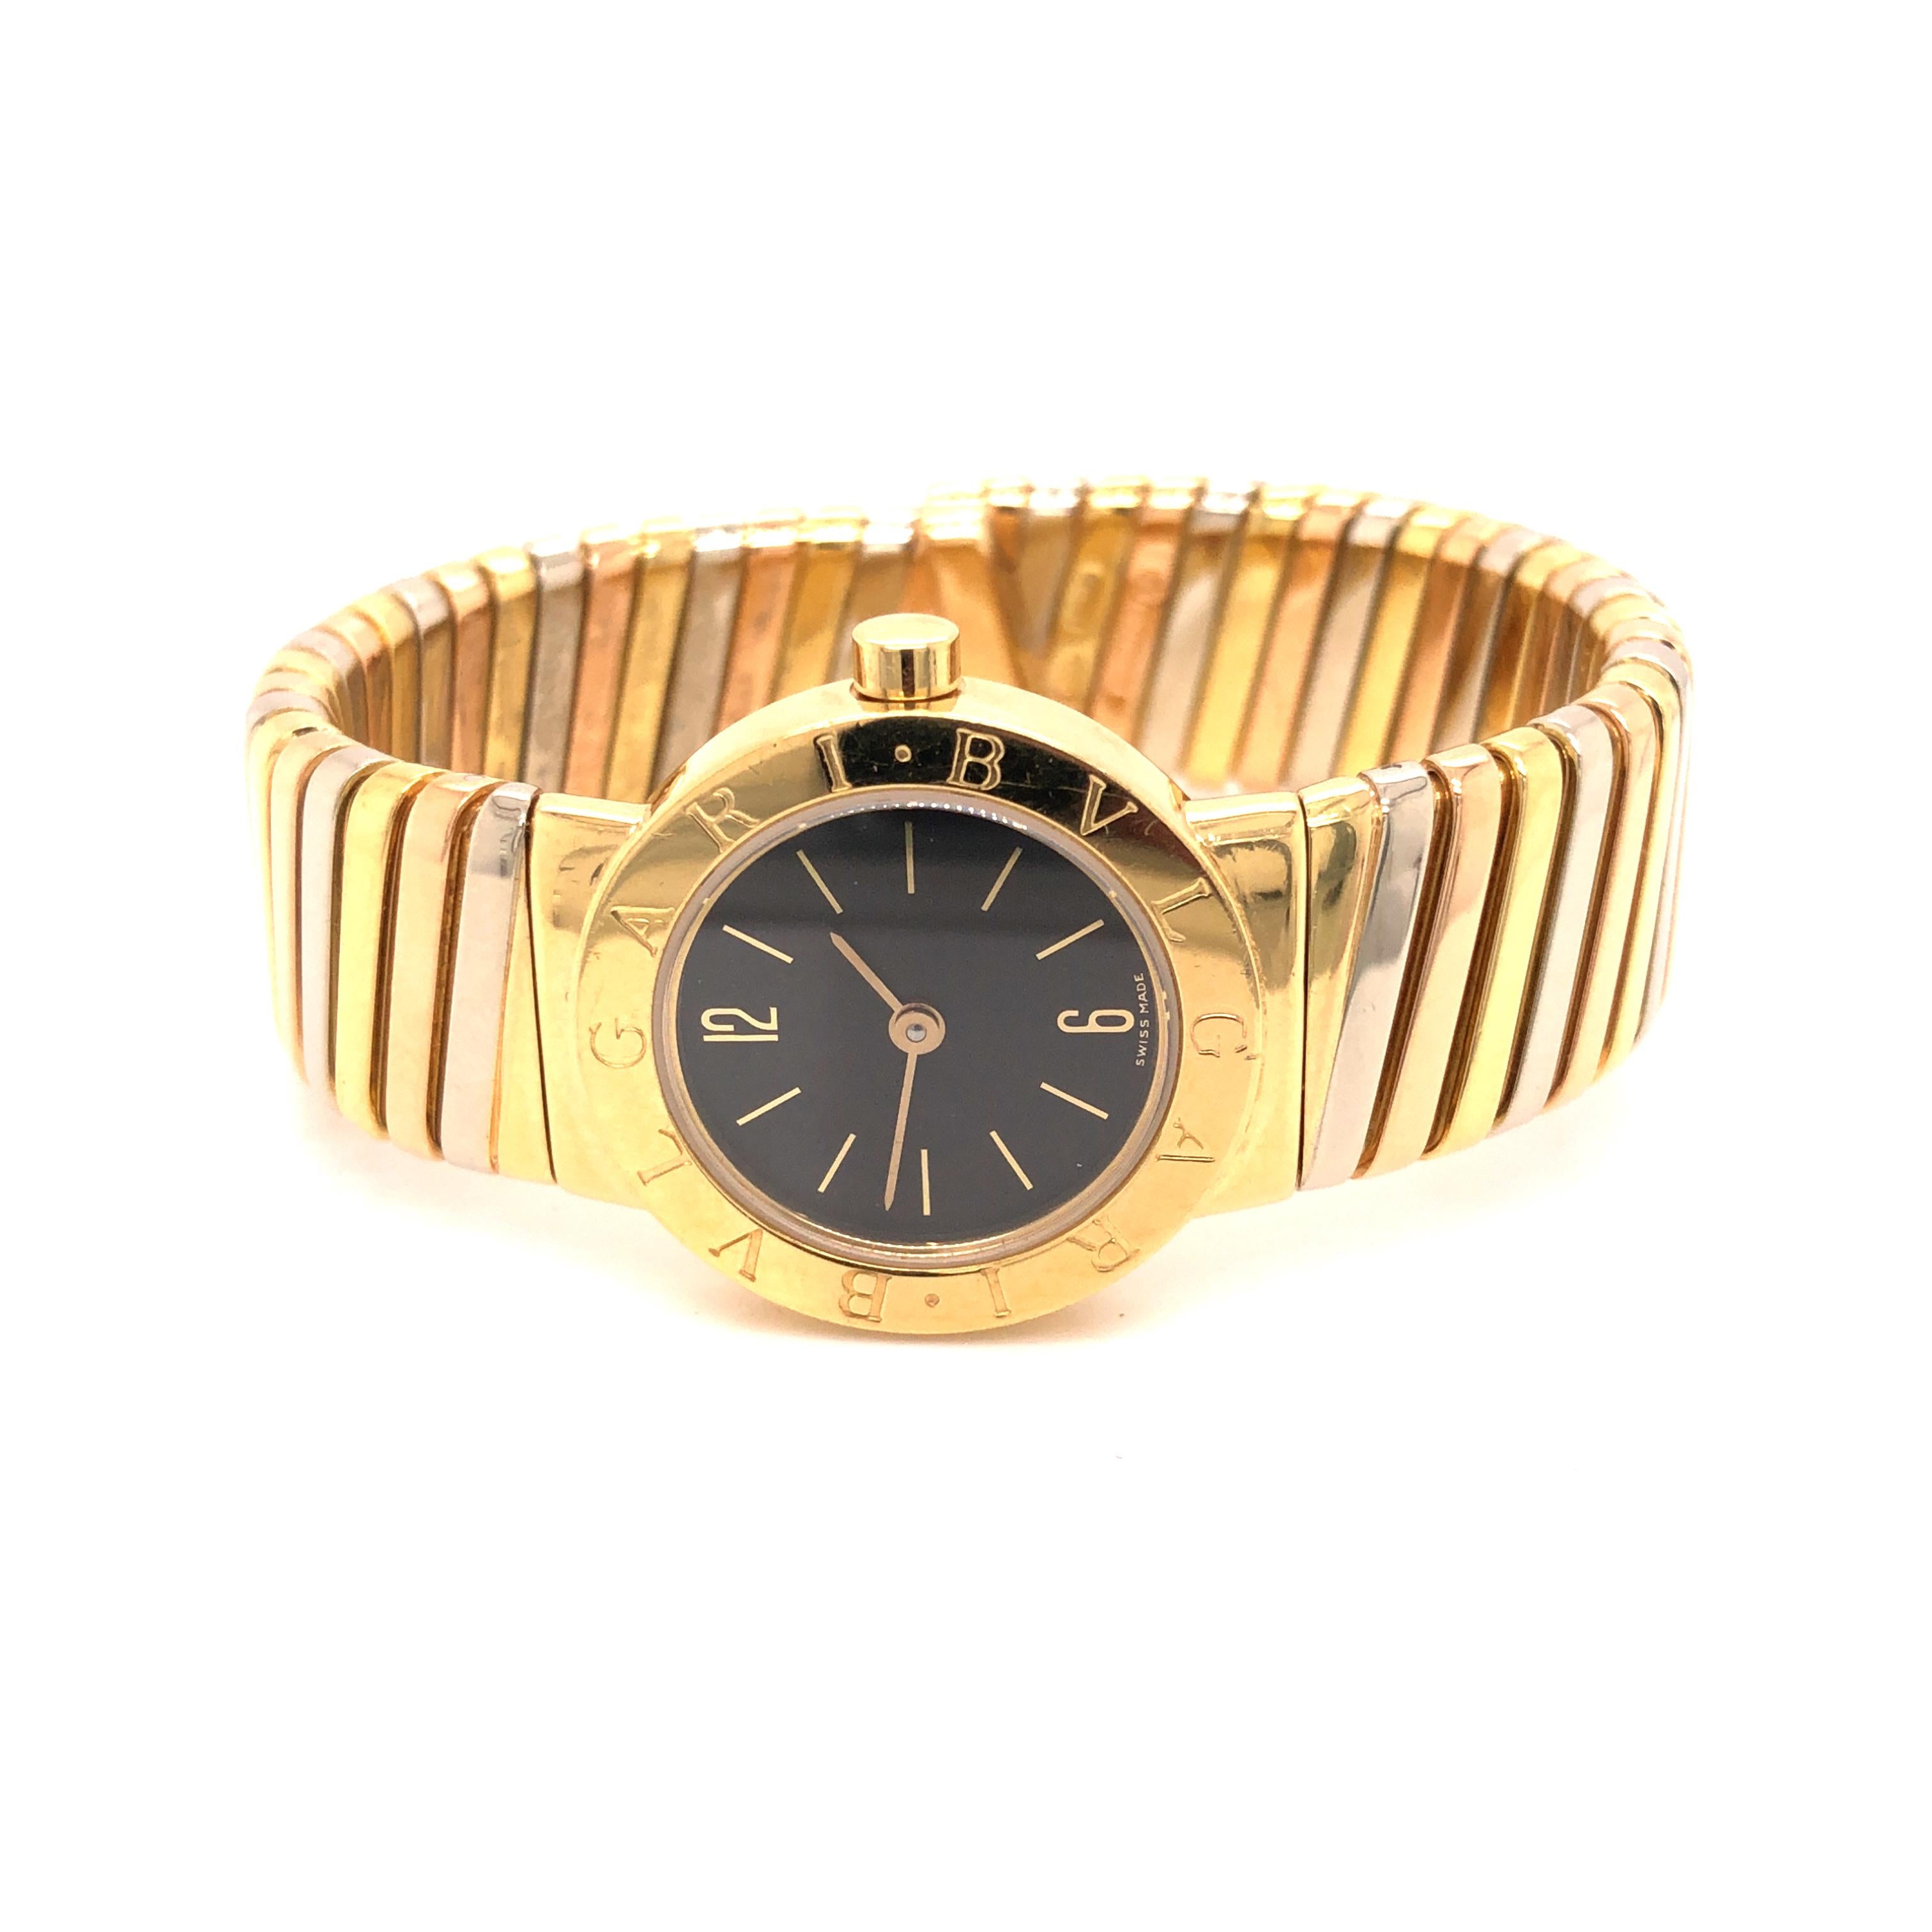 This vintage Swiss made Bvlgari watch is made of 18K white and yellow gold. The case is 24 mm with black dial and gold sticks. Arabic numerals at the 12 & 6 hour markers. 
The watch is currently not in working order.

Weight: 83.5 grams
